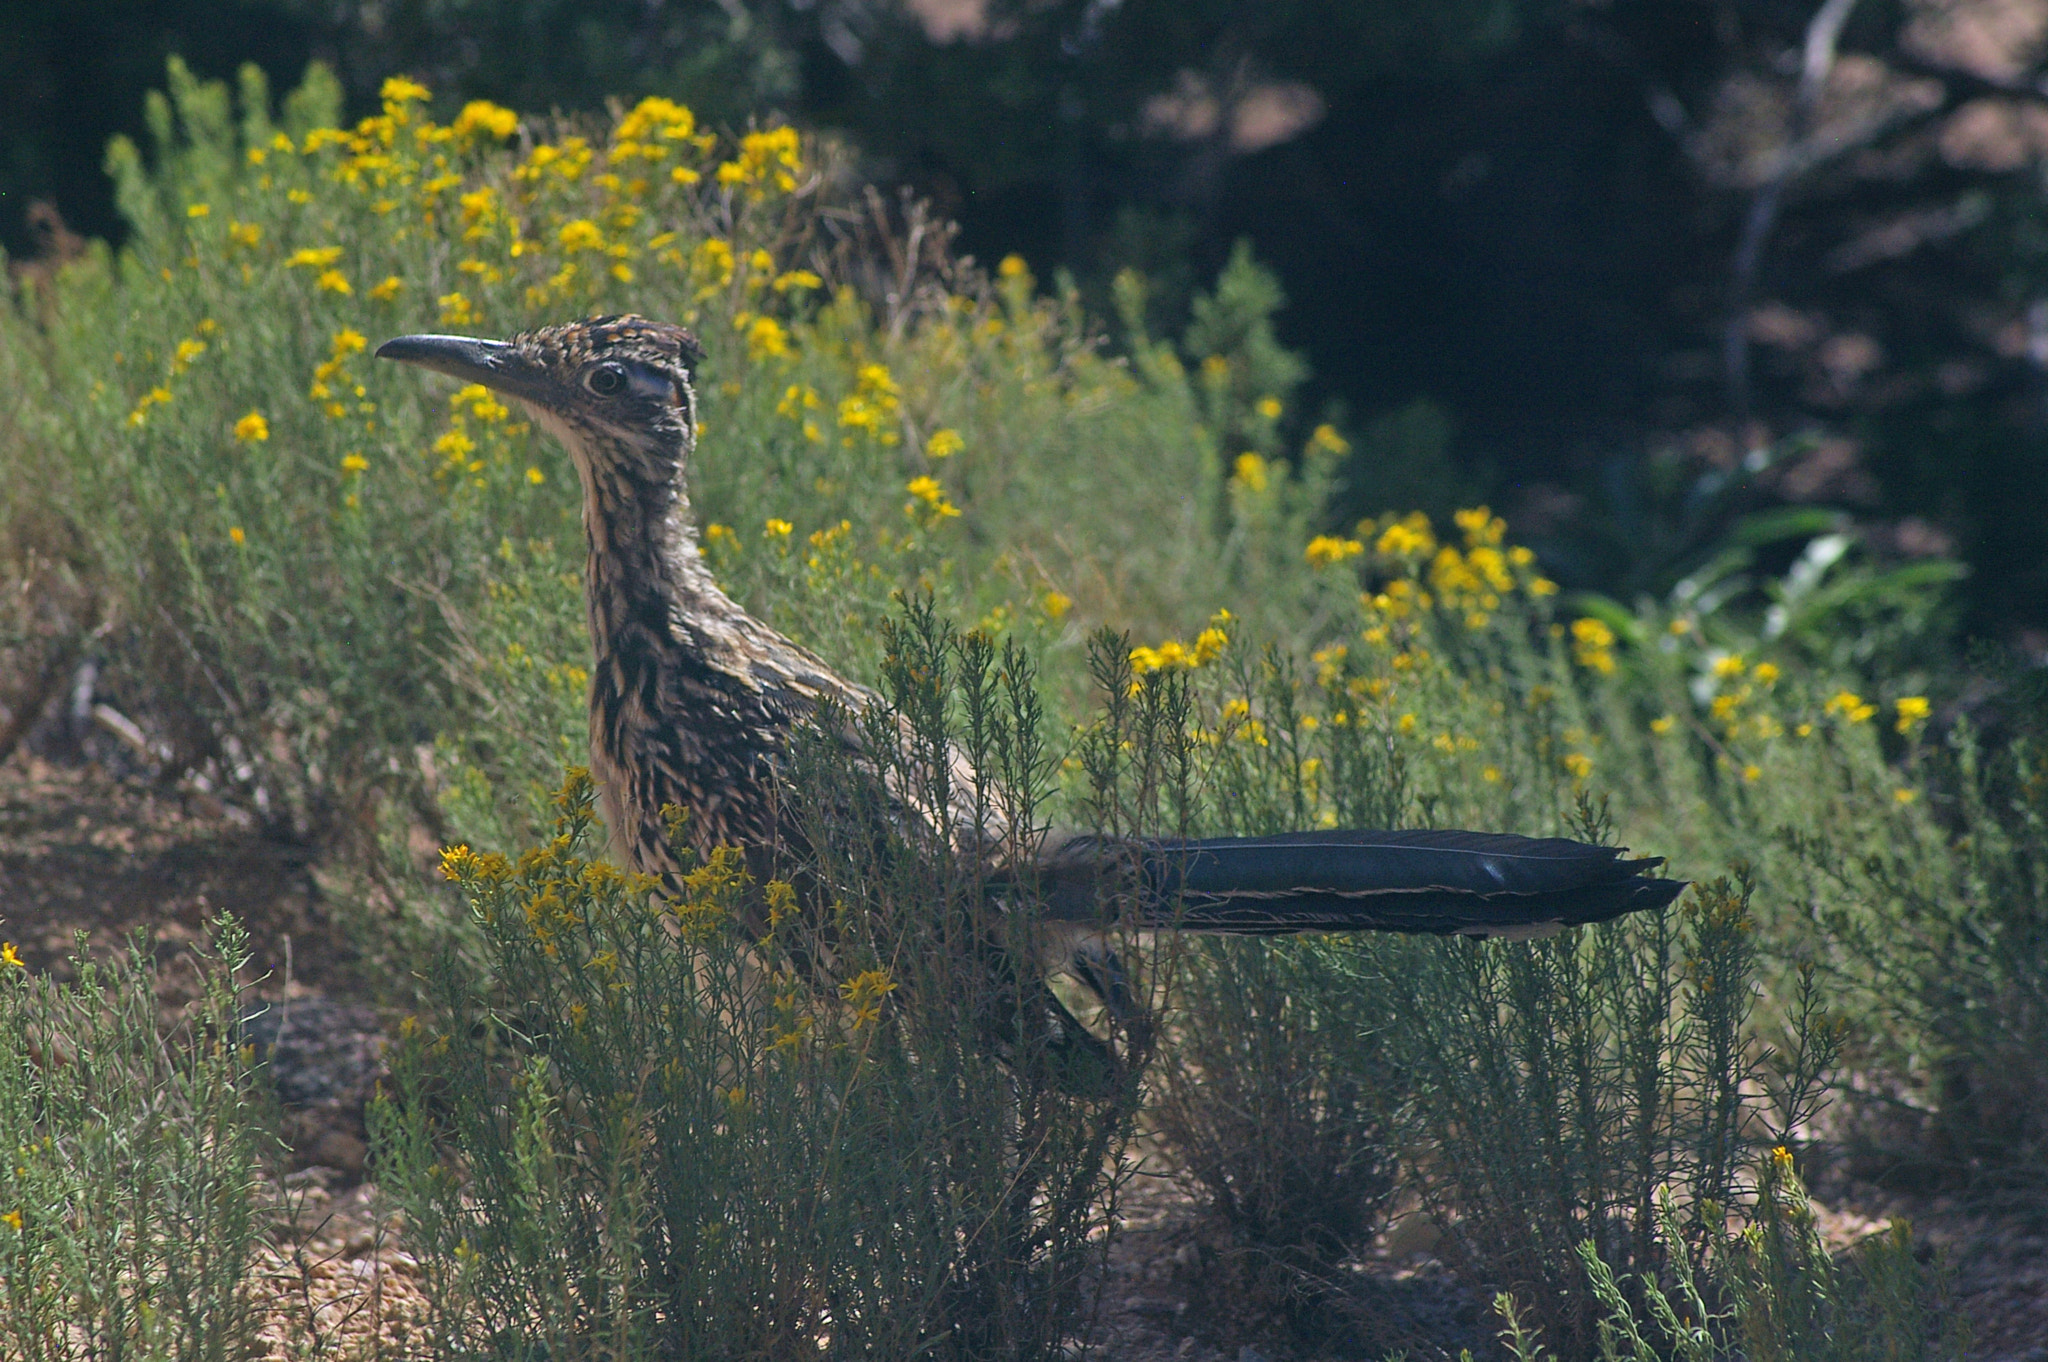 Pentax *ist DL sample photo. Roadrunner moves through the grass photography